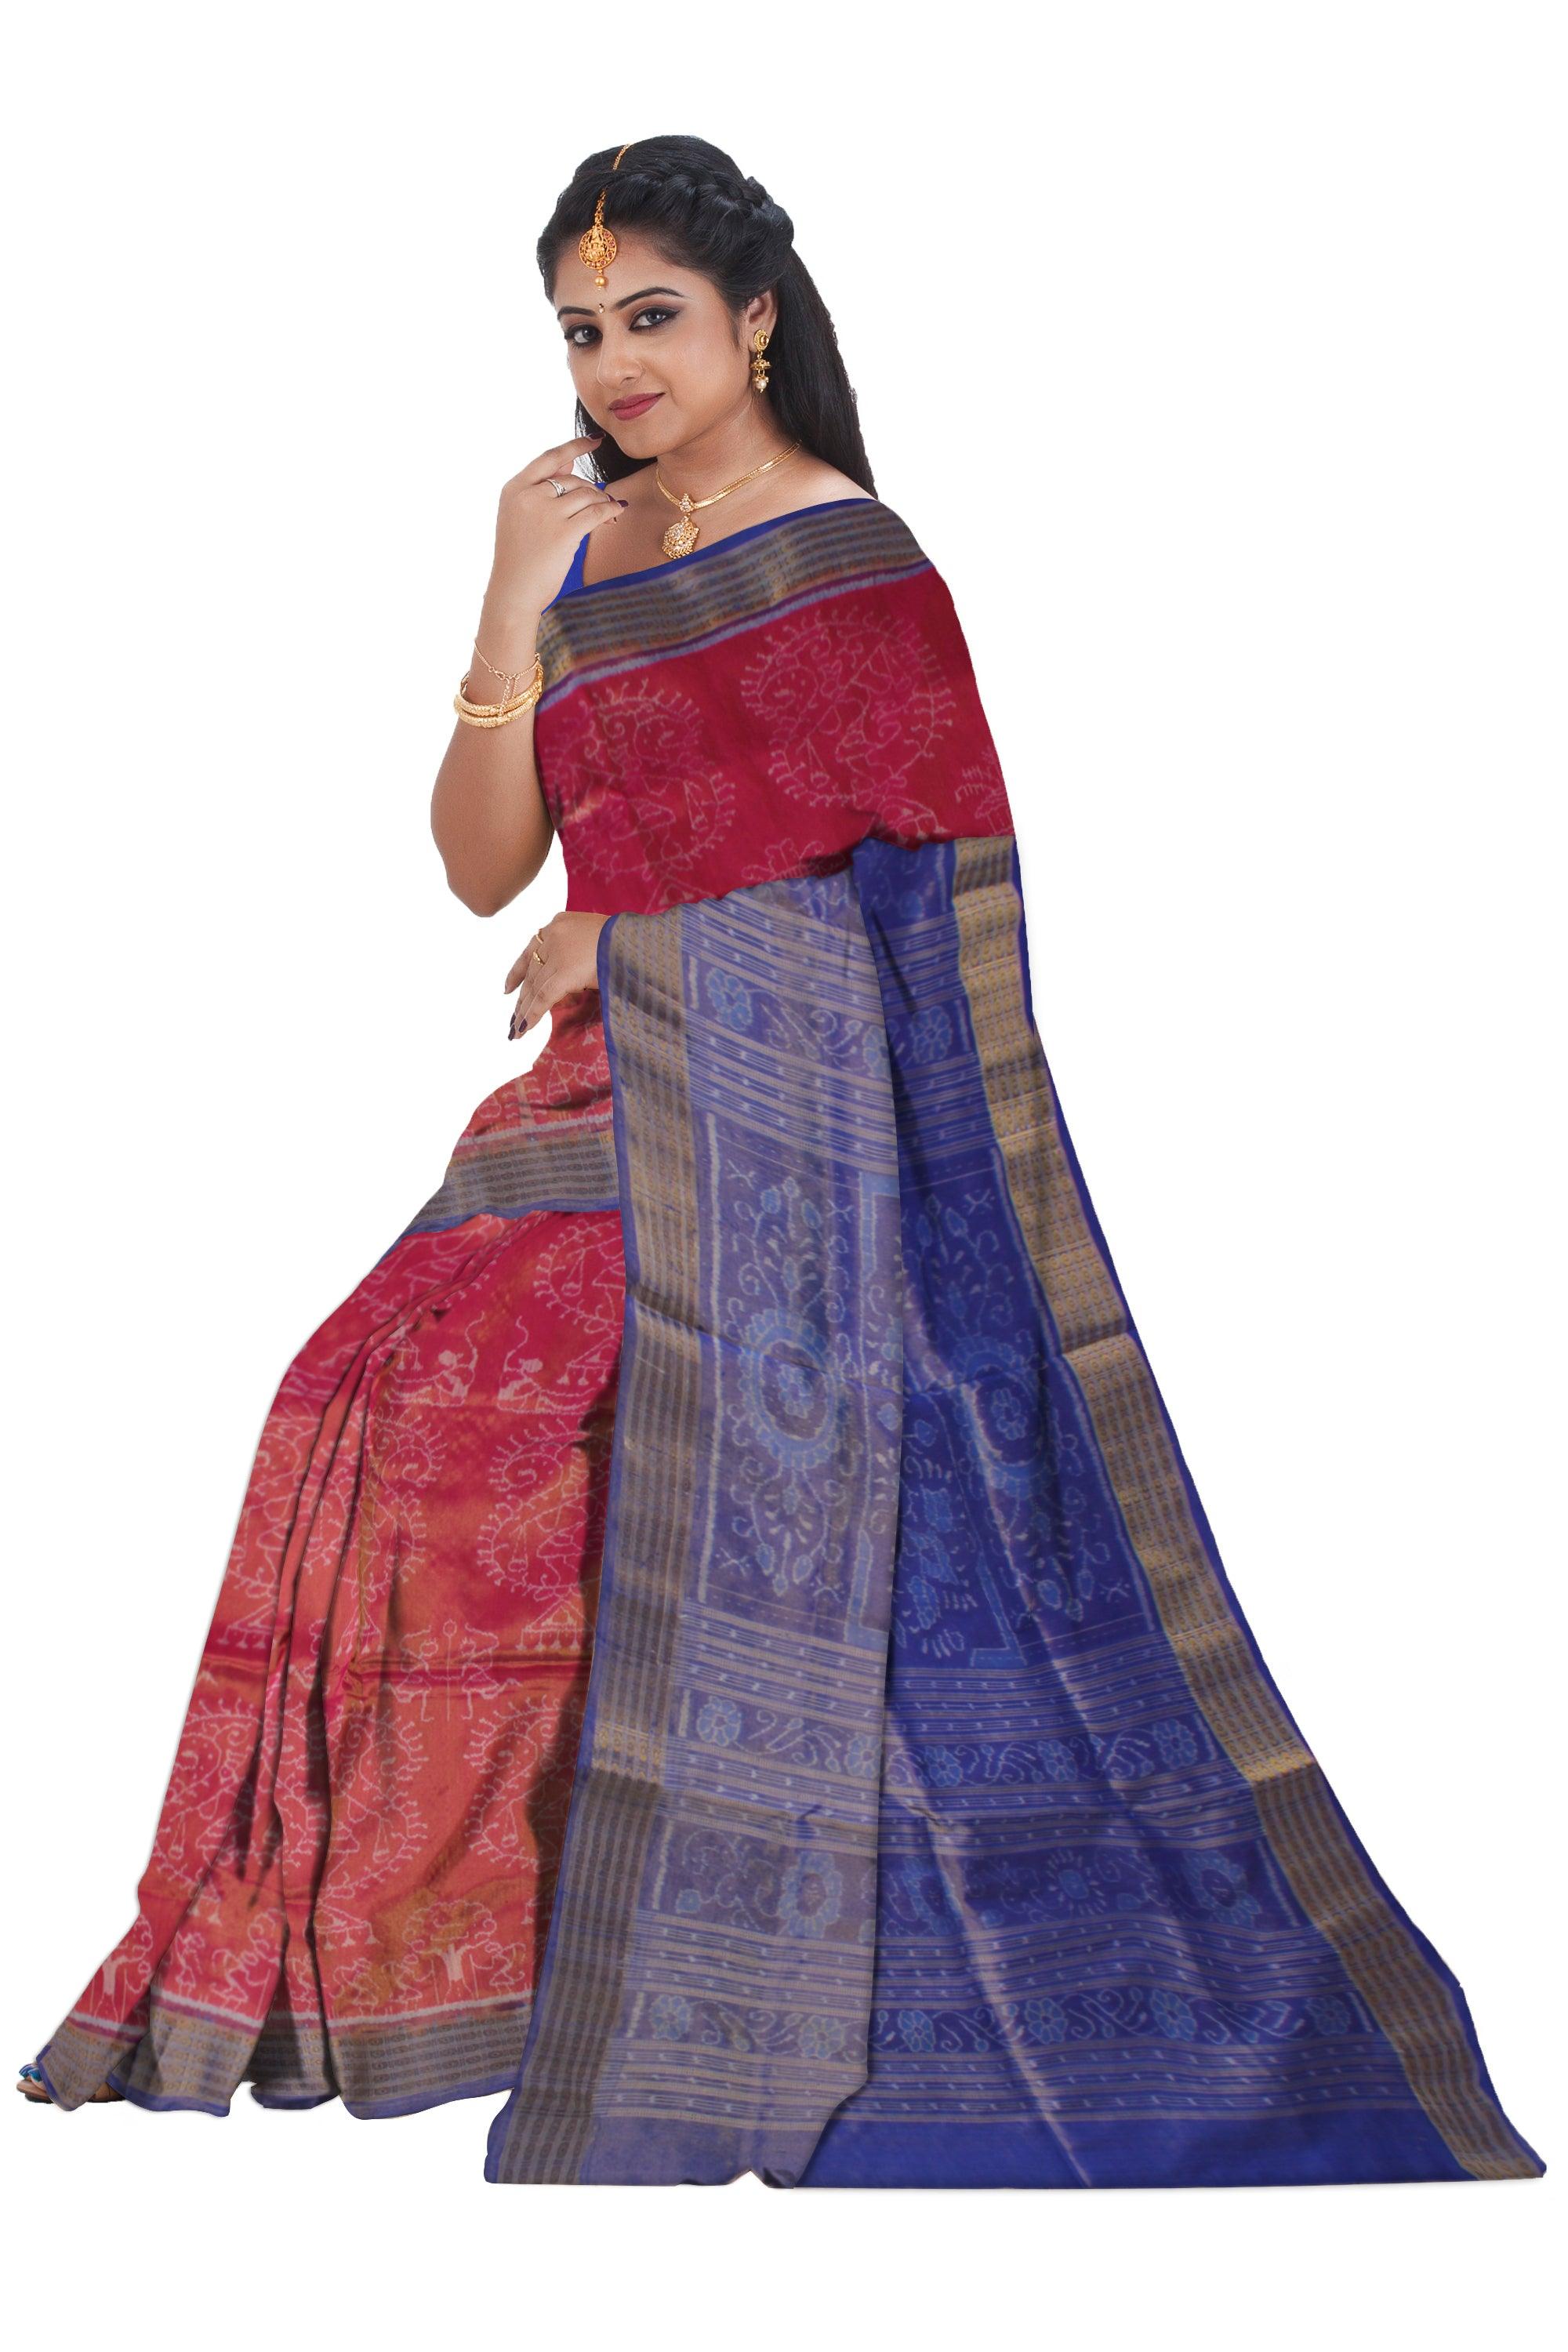 LATEST COLLECTION PURE TISSUE SILK SAREE IS DARK-PINK AND BLUE COLOR BASE, AVAILABLE WITH MATCHING BLOUSE PIECE. - Koshali Arts & Crafts Enterprise